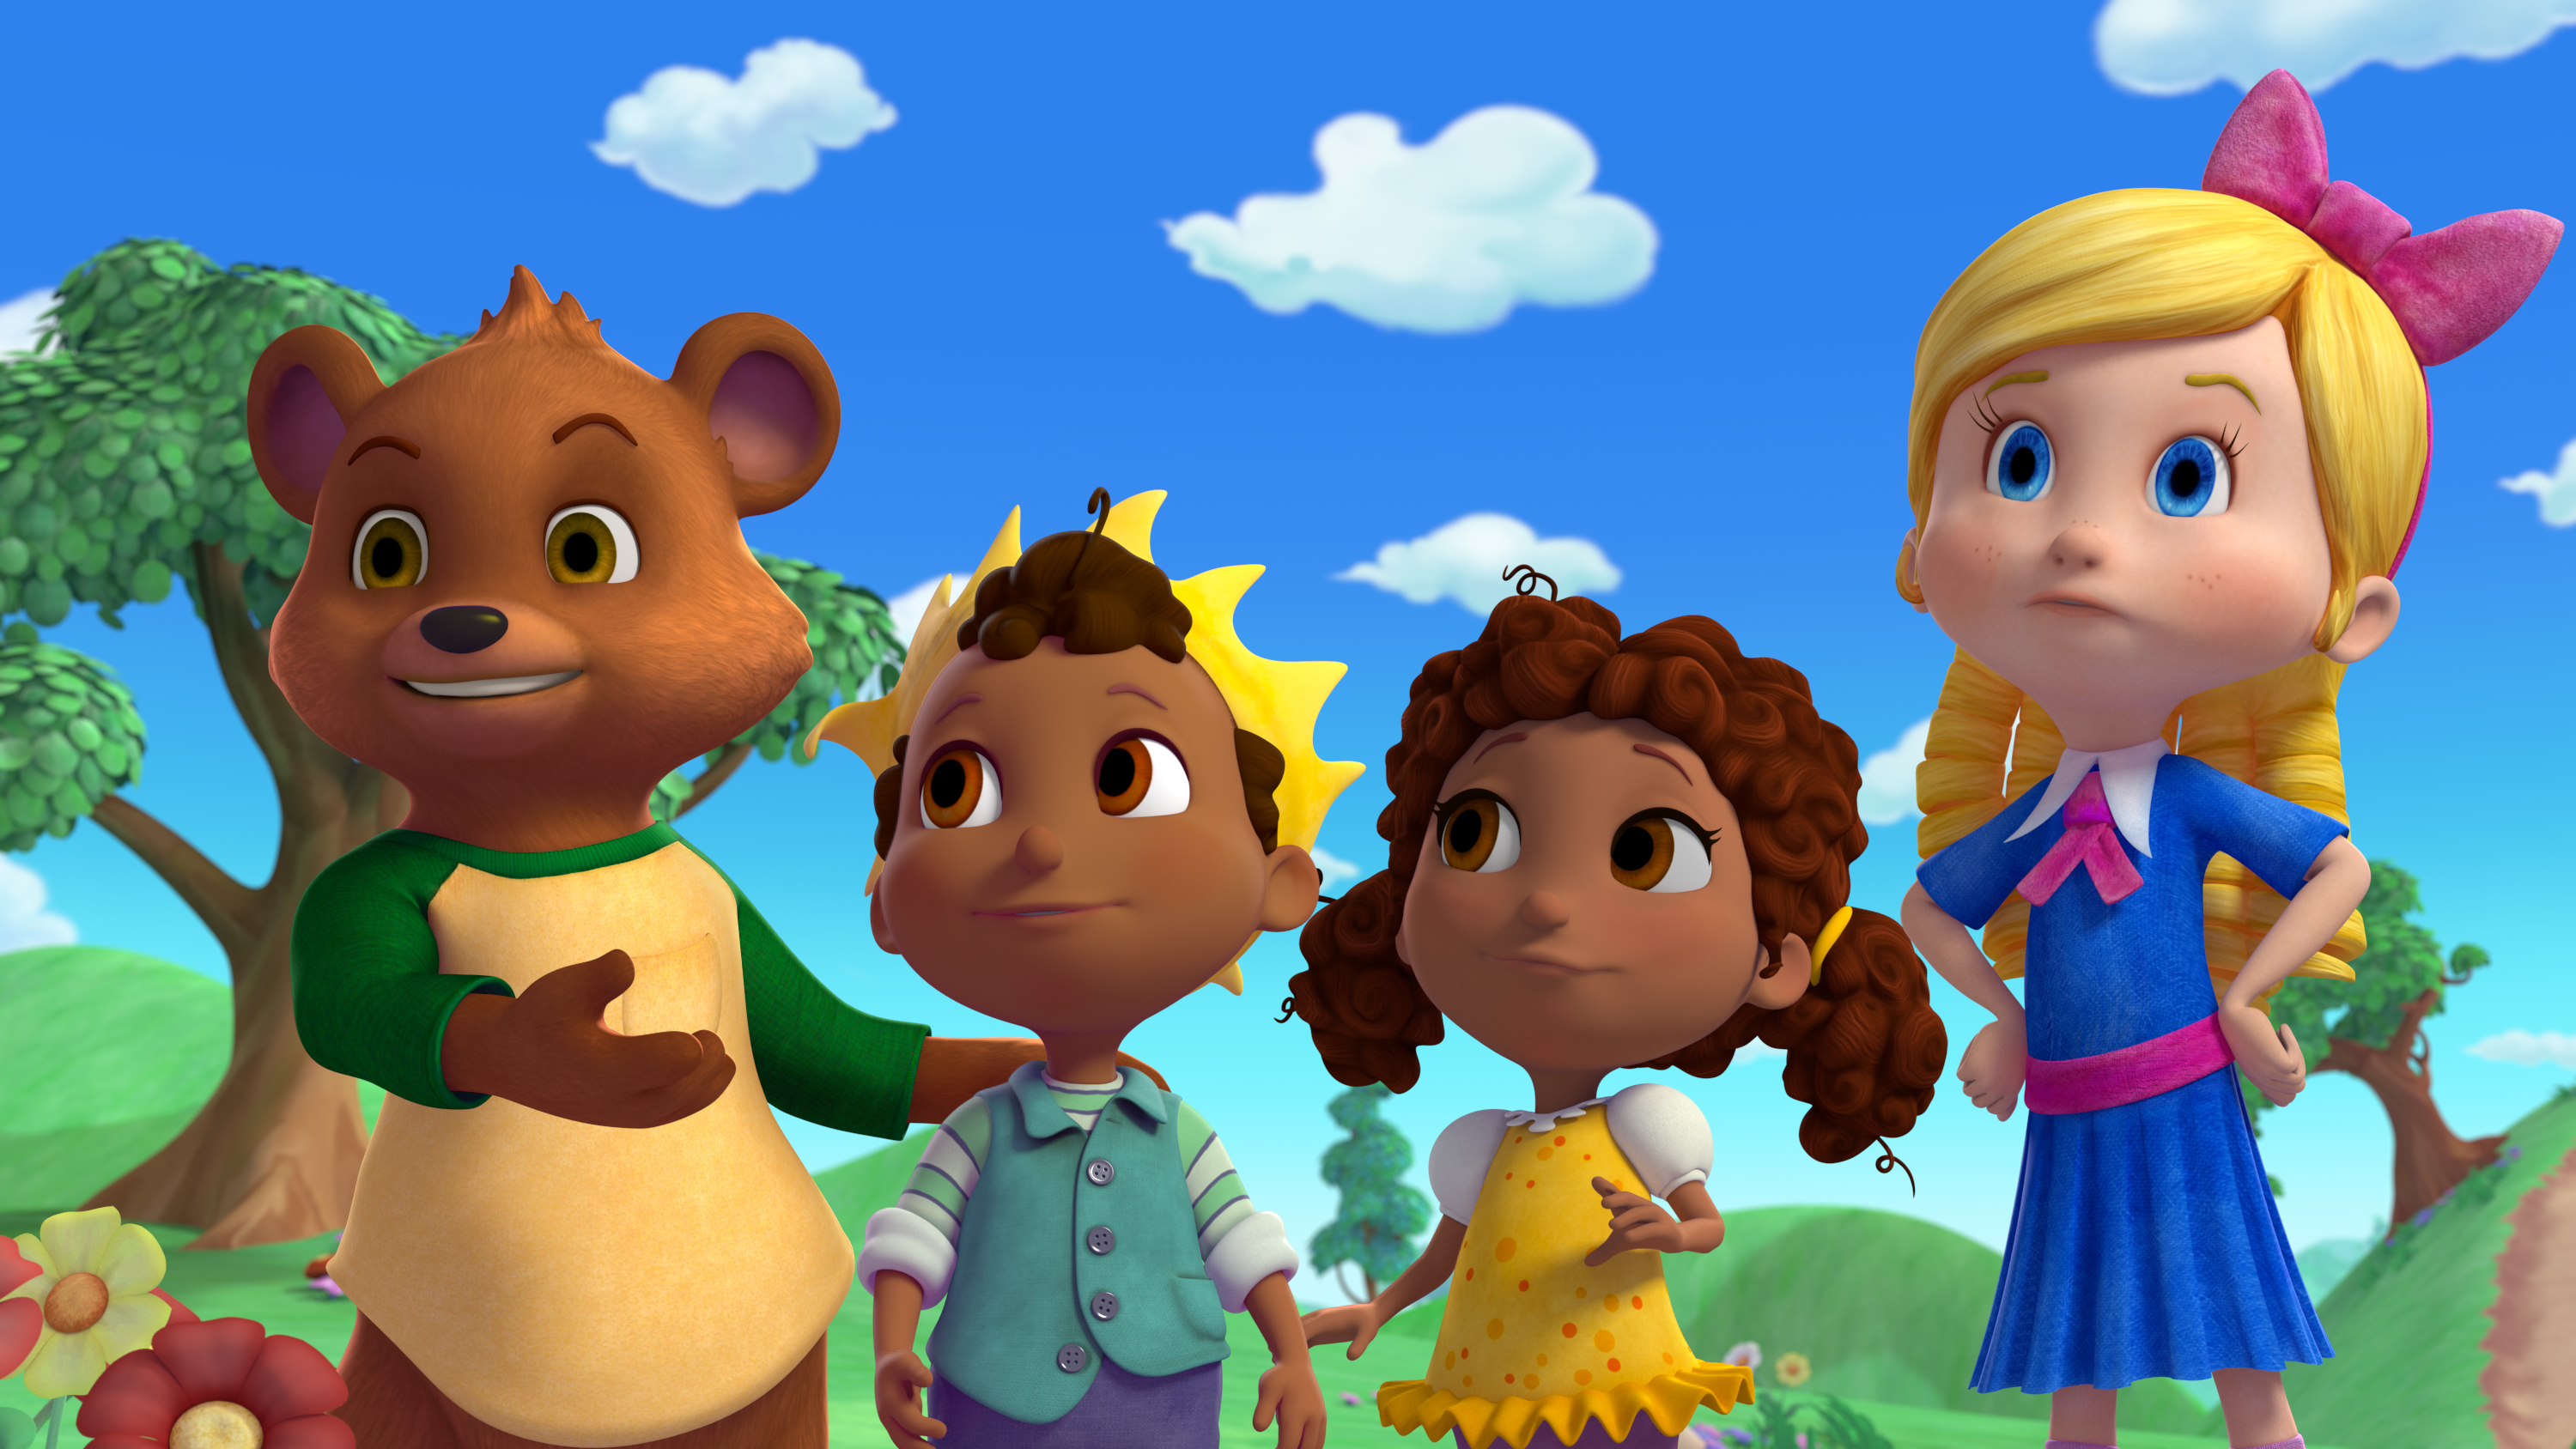 Disney Channel Puts a New Spin on the Goldilocks Story With Goldie